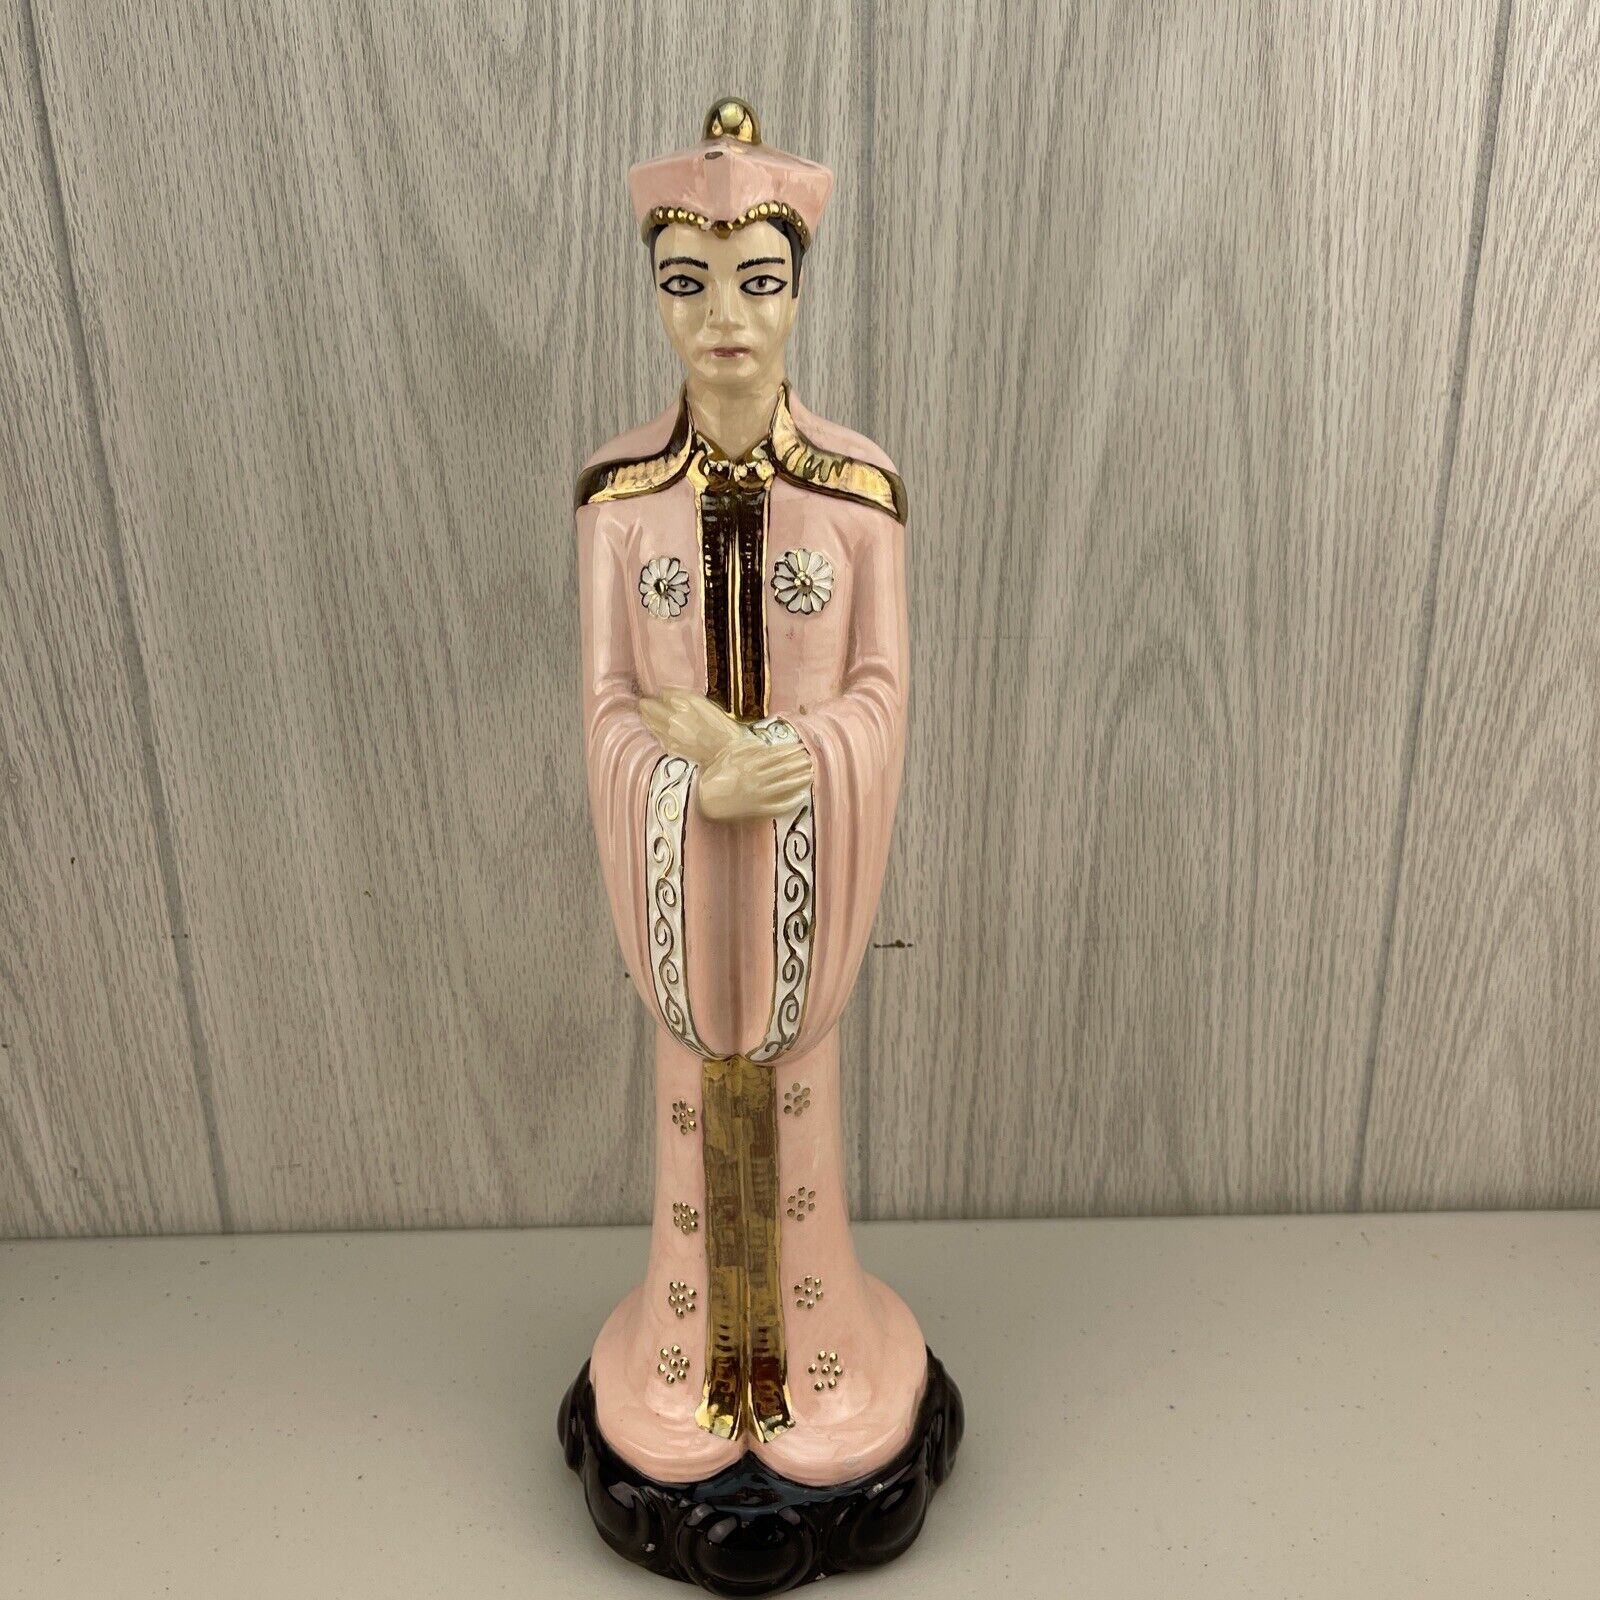 Vintage 1980s Asian Figurine I Love Lucy Stewart McCulloch STYLE Signed HRN 82